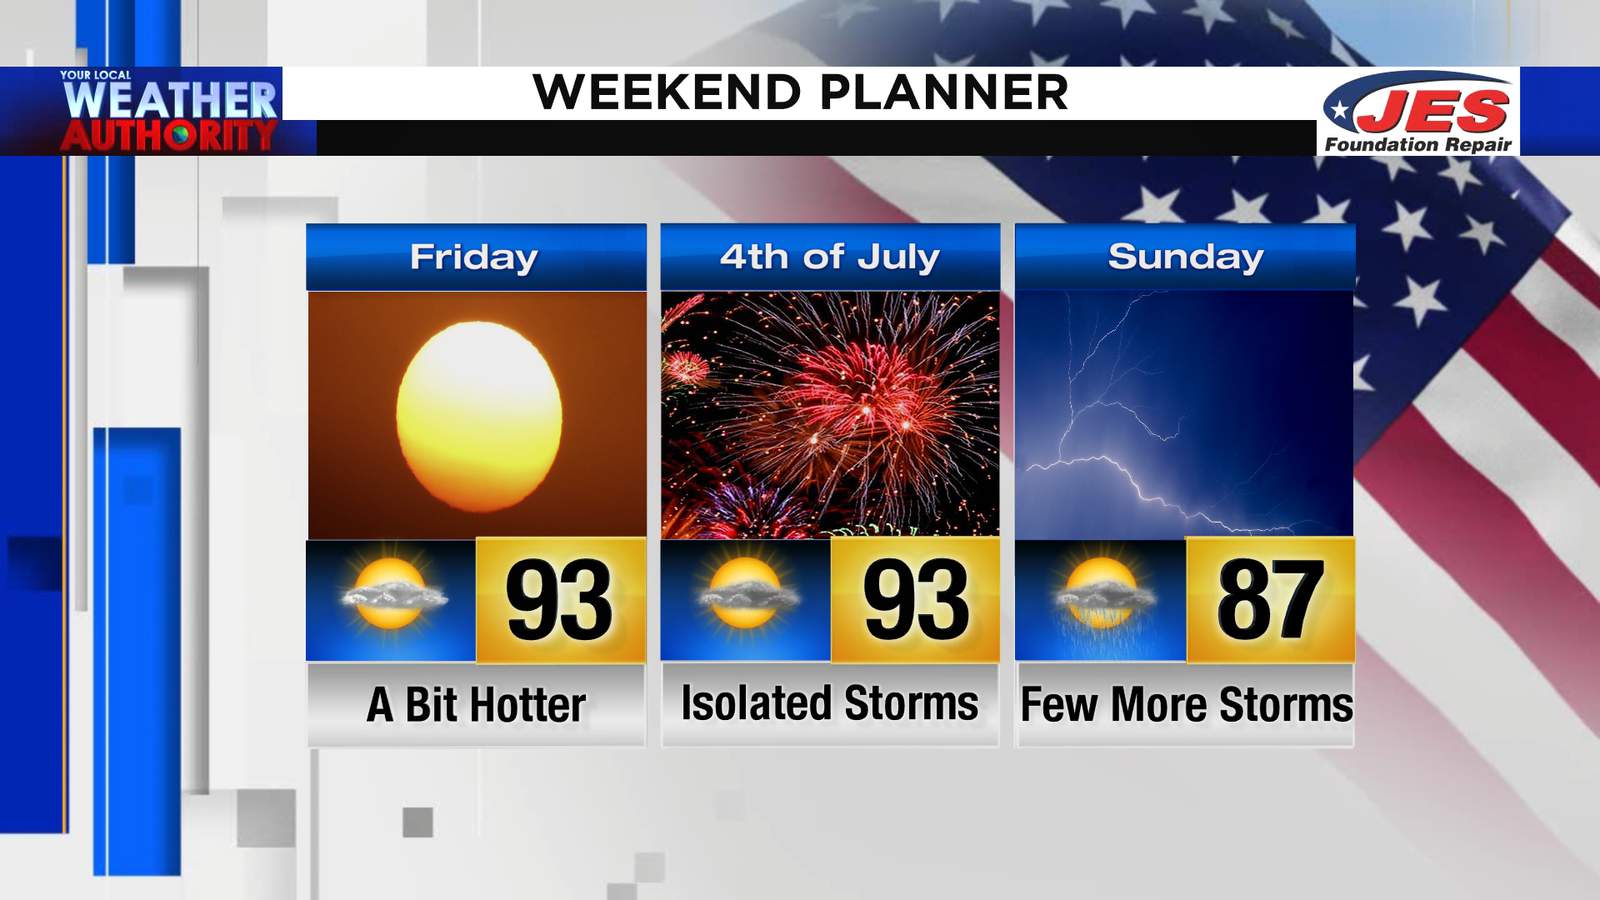 Hotter than a firecracker; temps reach 90s Friday and 4th of July